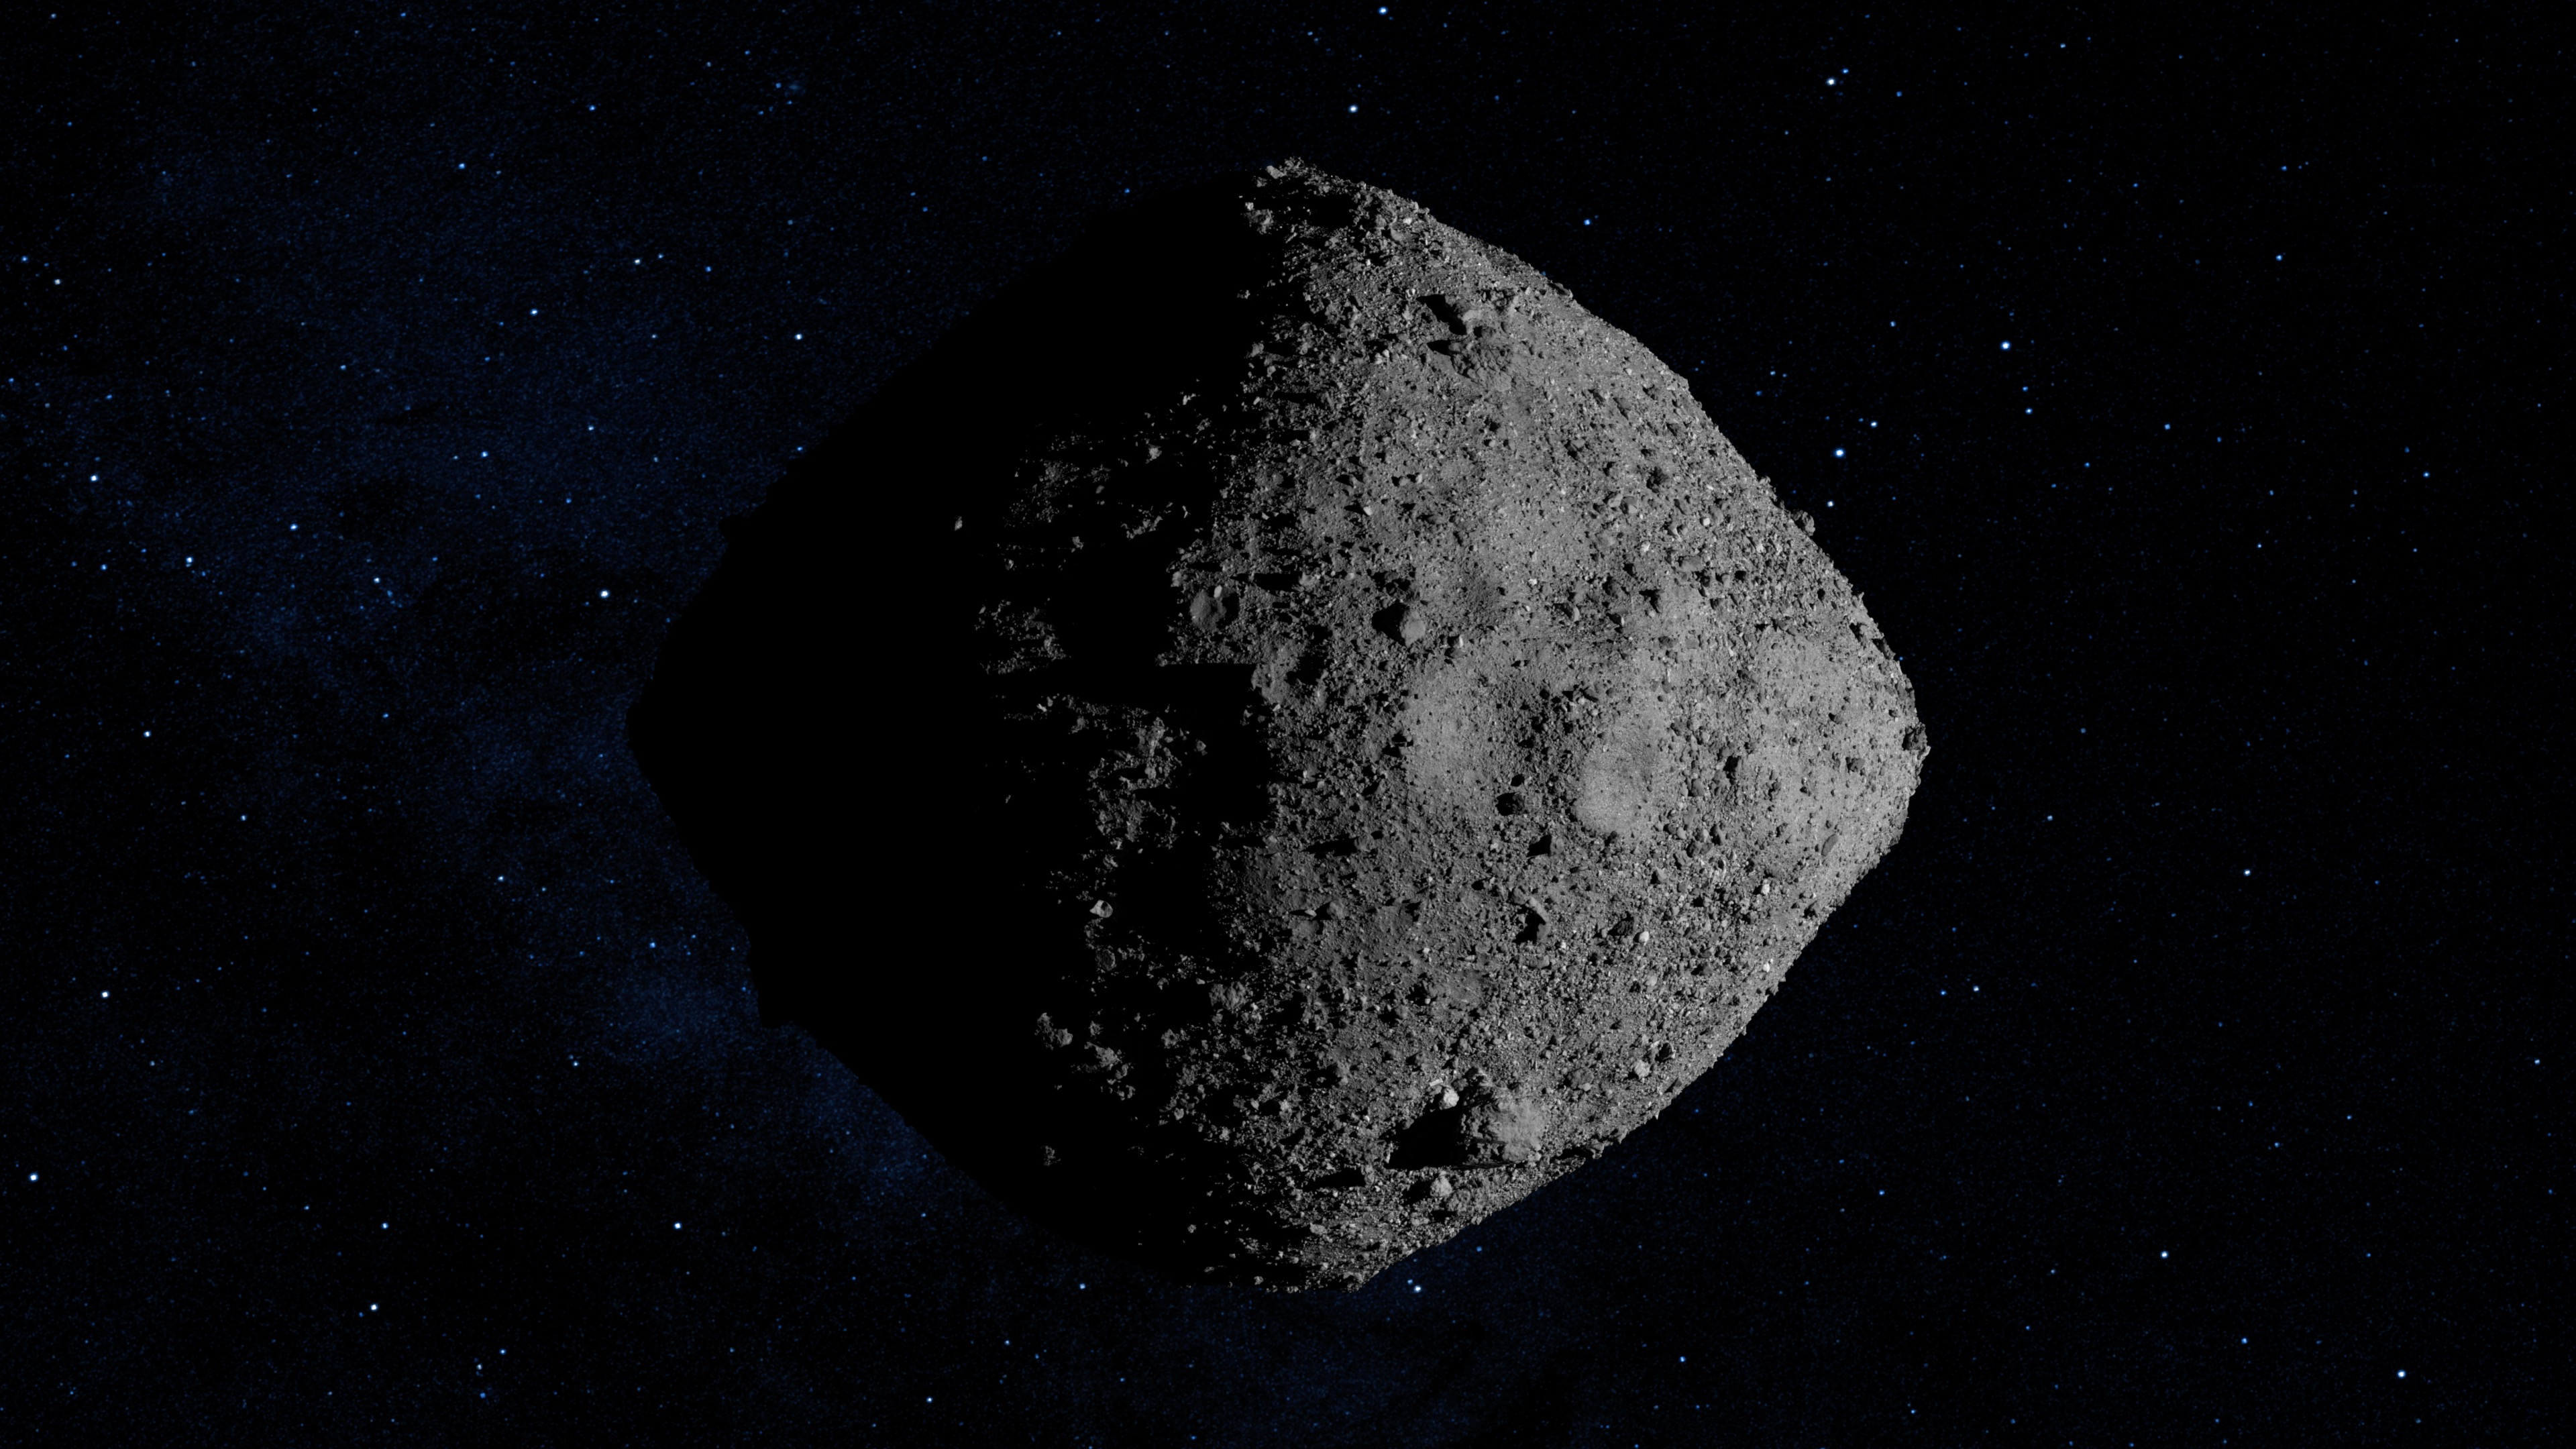 Revisit the TAG event in this narrated video and learn why asteroid Bennu’s surface is surprisingly weak.Complete transcript available.Universal Production Music: “Difficult Conversation” and “Into Motion” by Peter Larsen; “Big Data” by Dominique Dalcan; “Subsurface” by Ben Niblett and Jon Cotton; “Crypto Current” by Dominique Dalcan; “Spaceman” by RainmanWatch this video on the NASA Goddard YouTube channel.